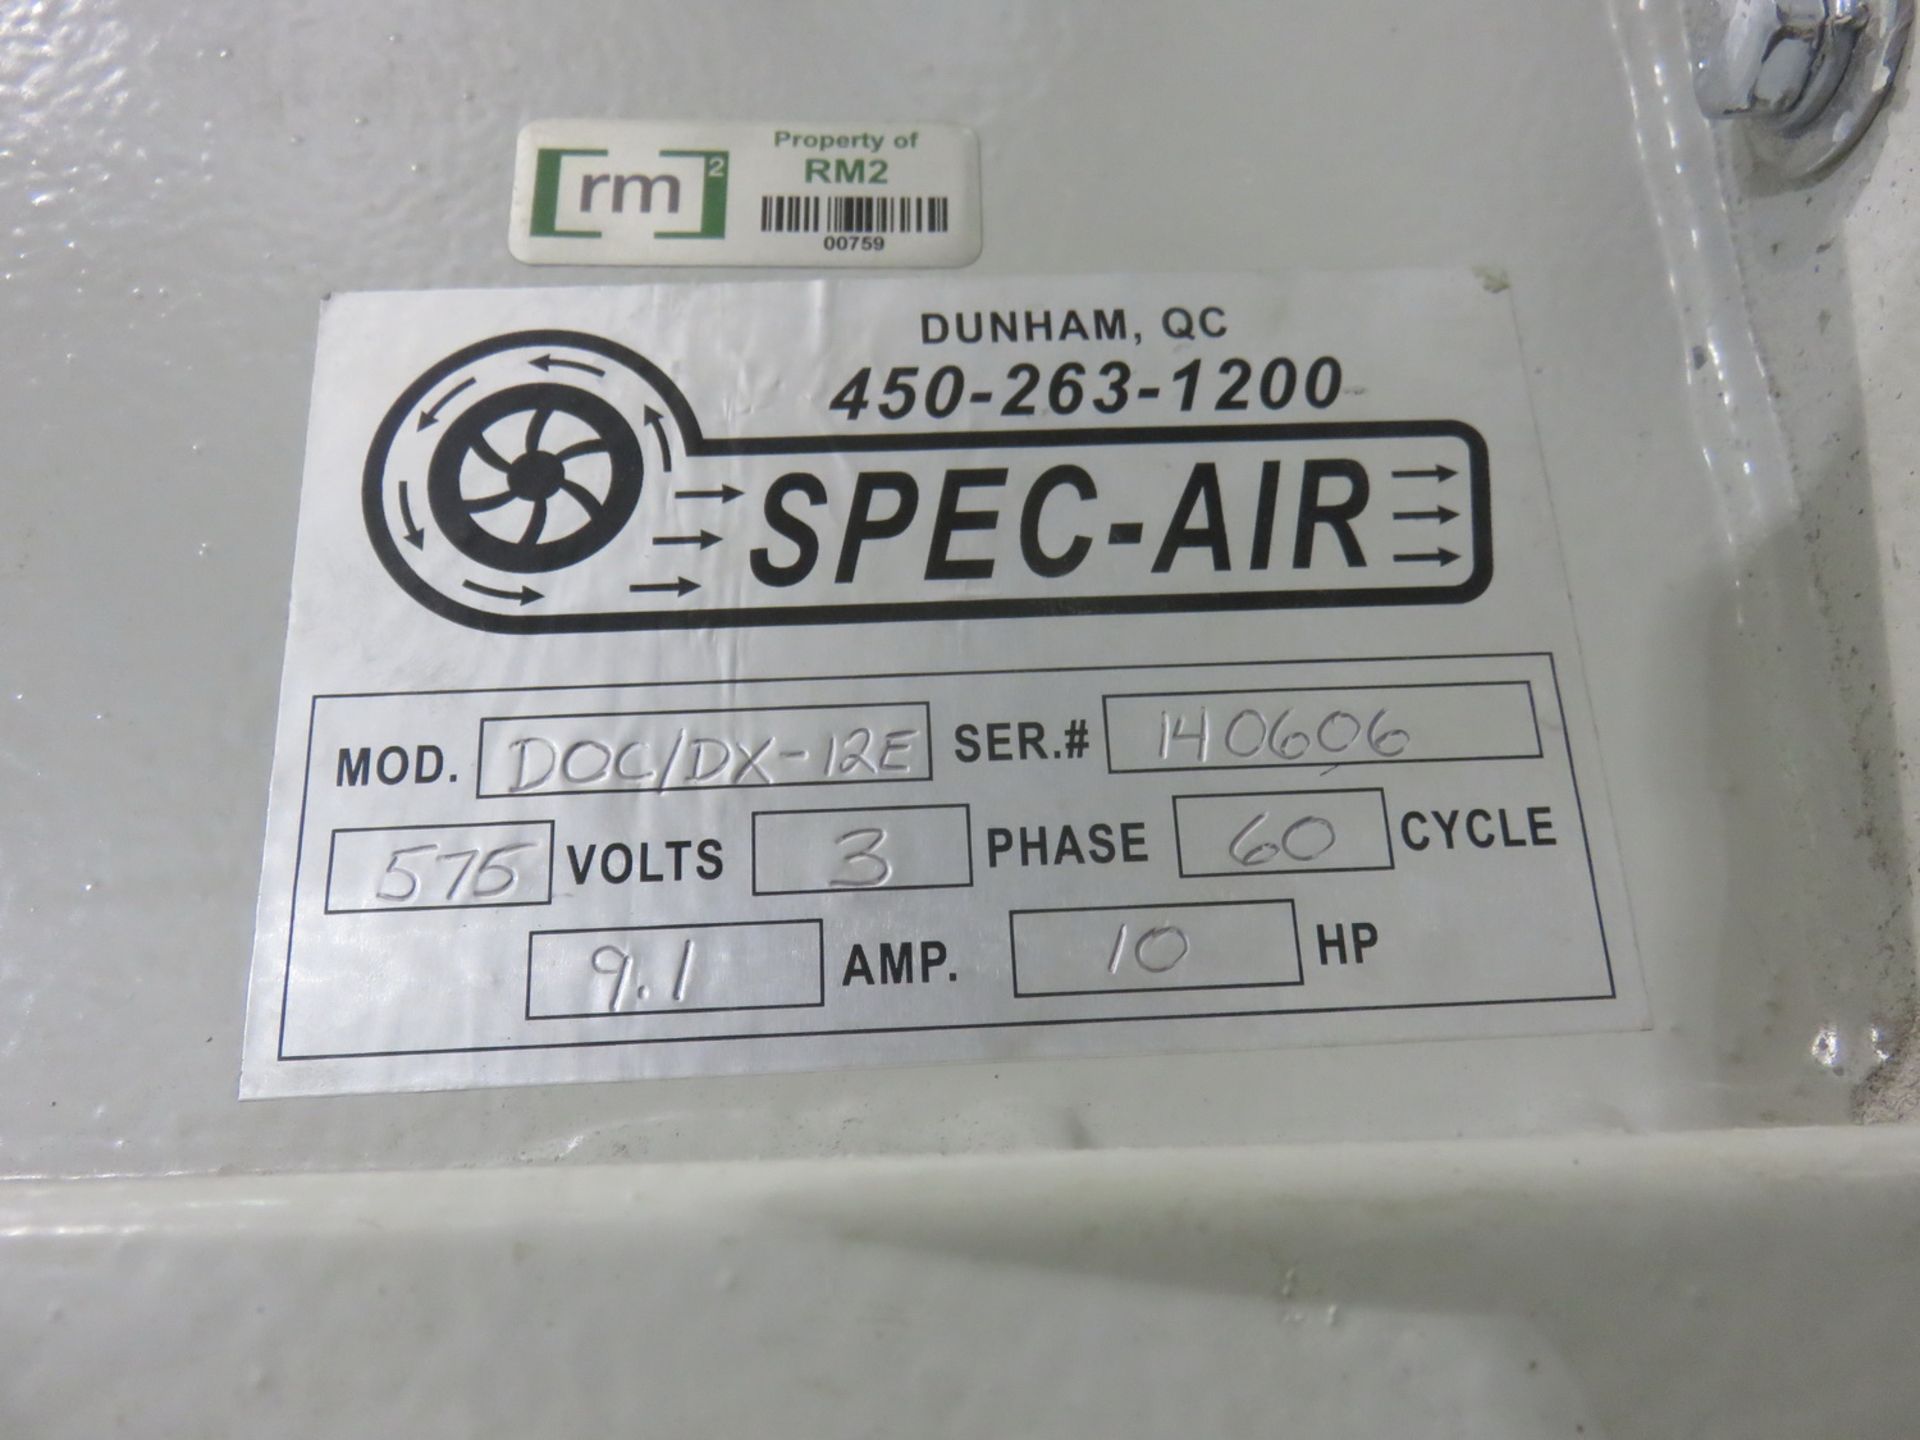 SPEC AIR DOC/DX-12E 10 HP 25 BAG UPRIGHT DUST COLLECTOR W/ BOTTOM DUMP BIN HOSE + BAGS - S/N 140606 - Image 2 of 5